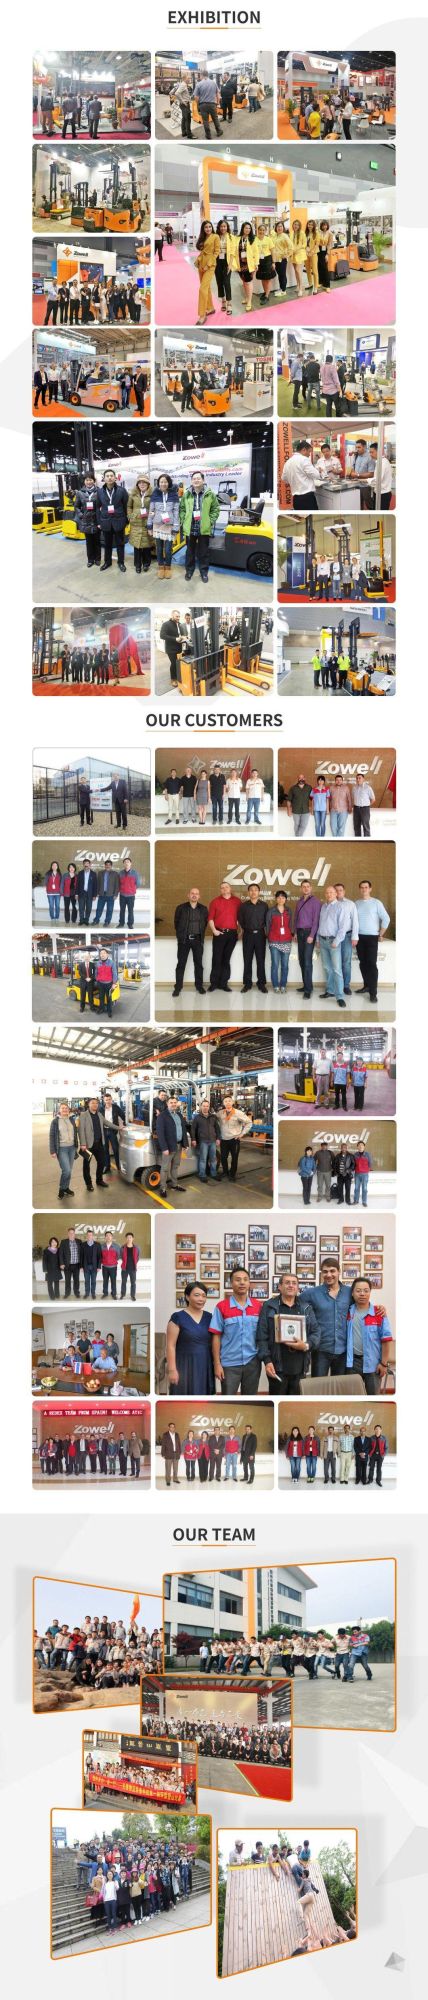 Zowell 2 Ton Electric Reach Stacker with Bale Clamp Customized Available